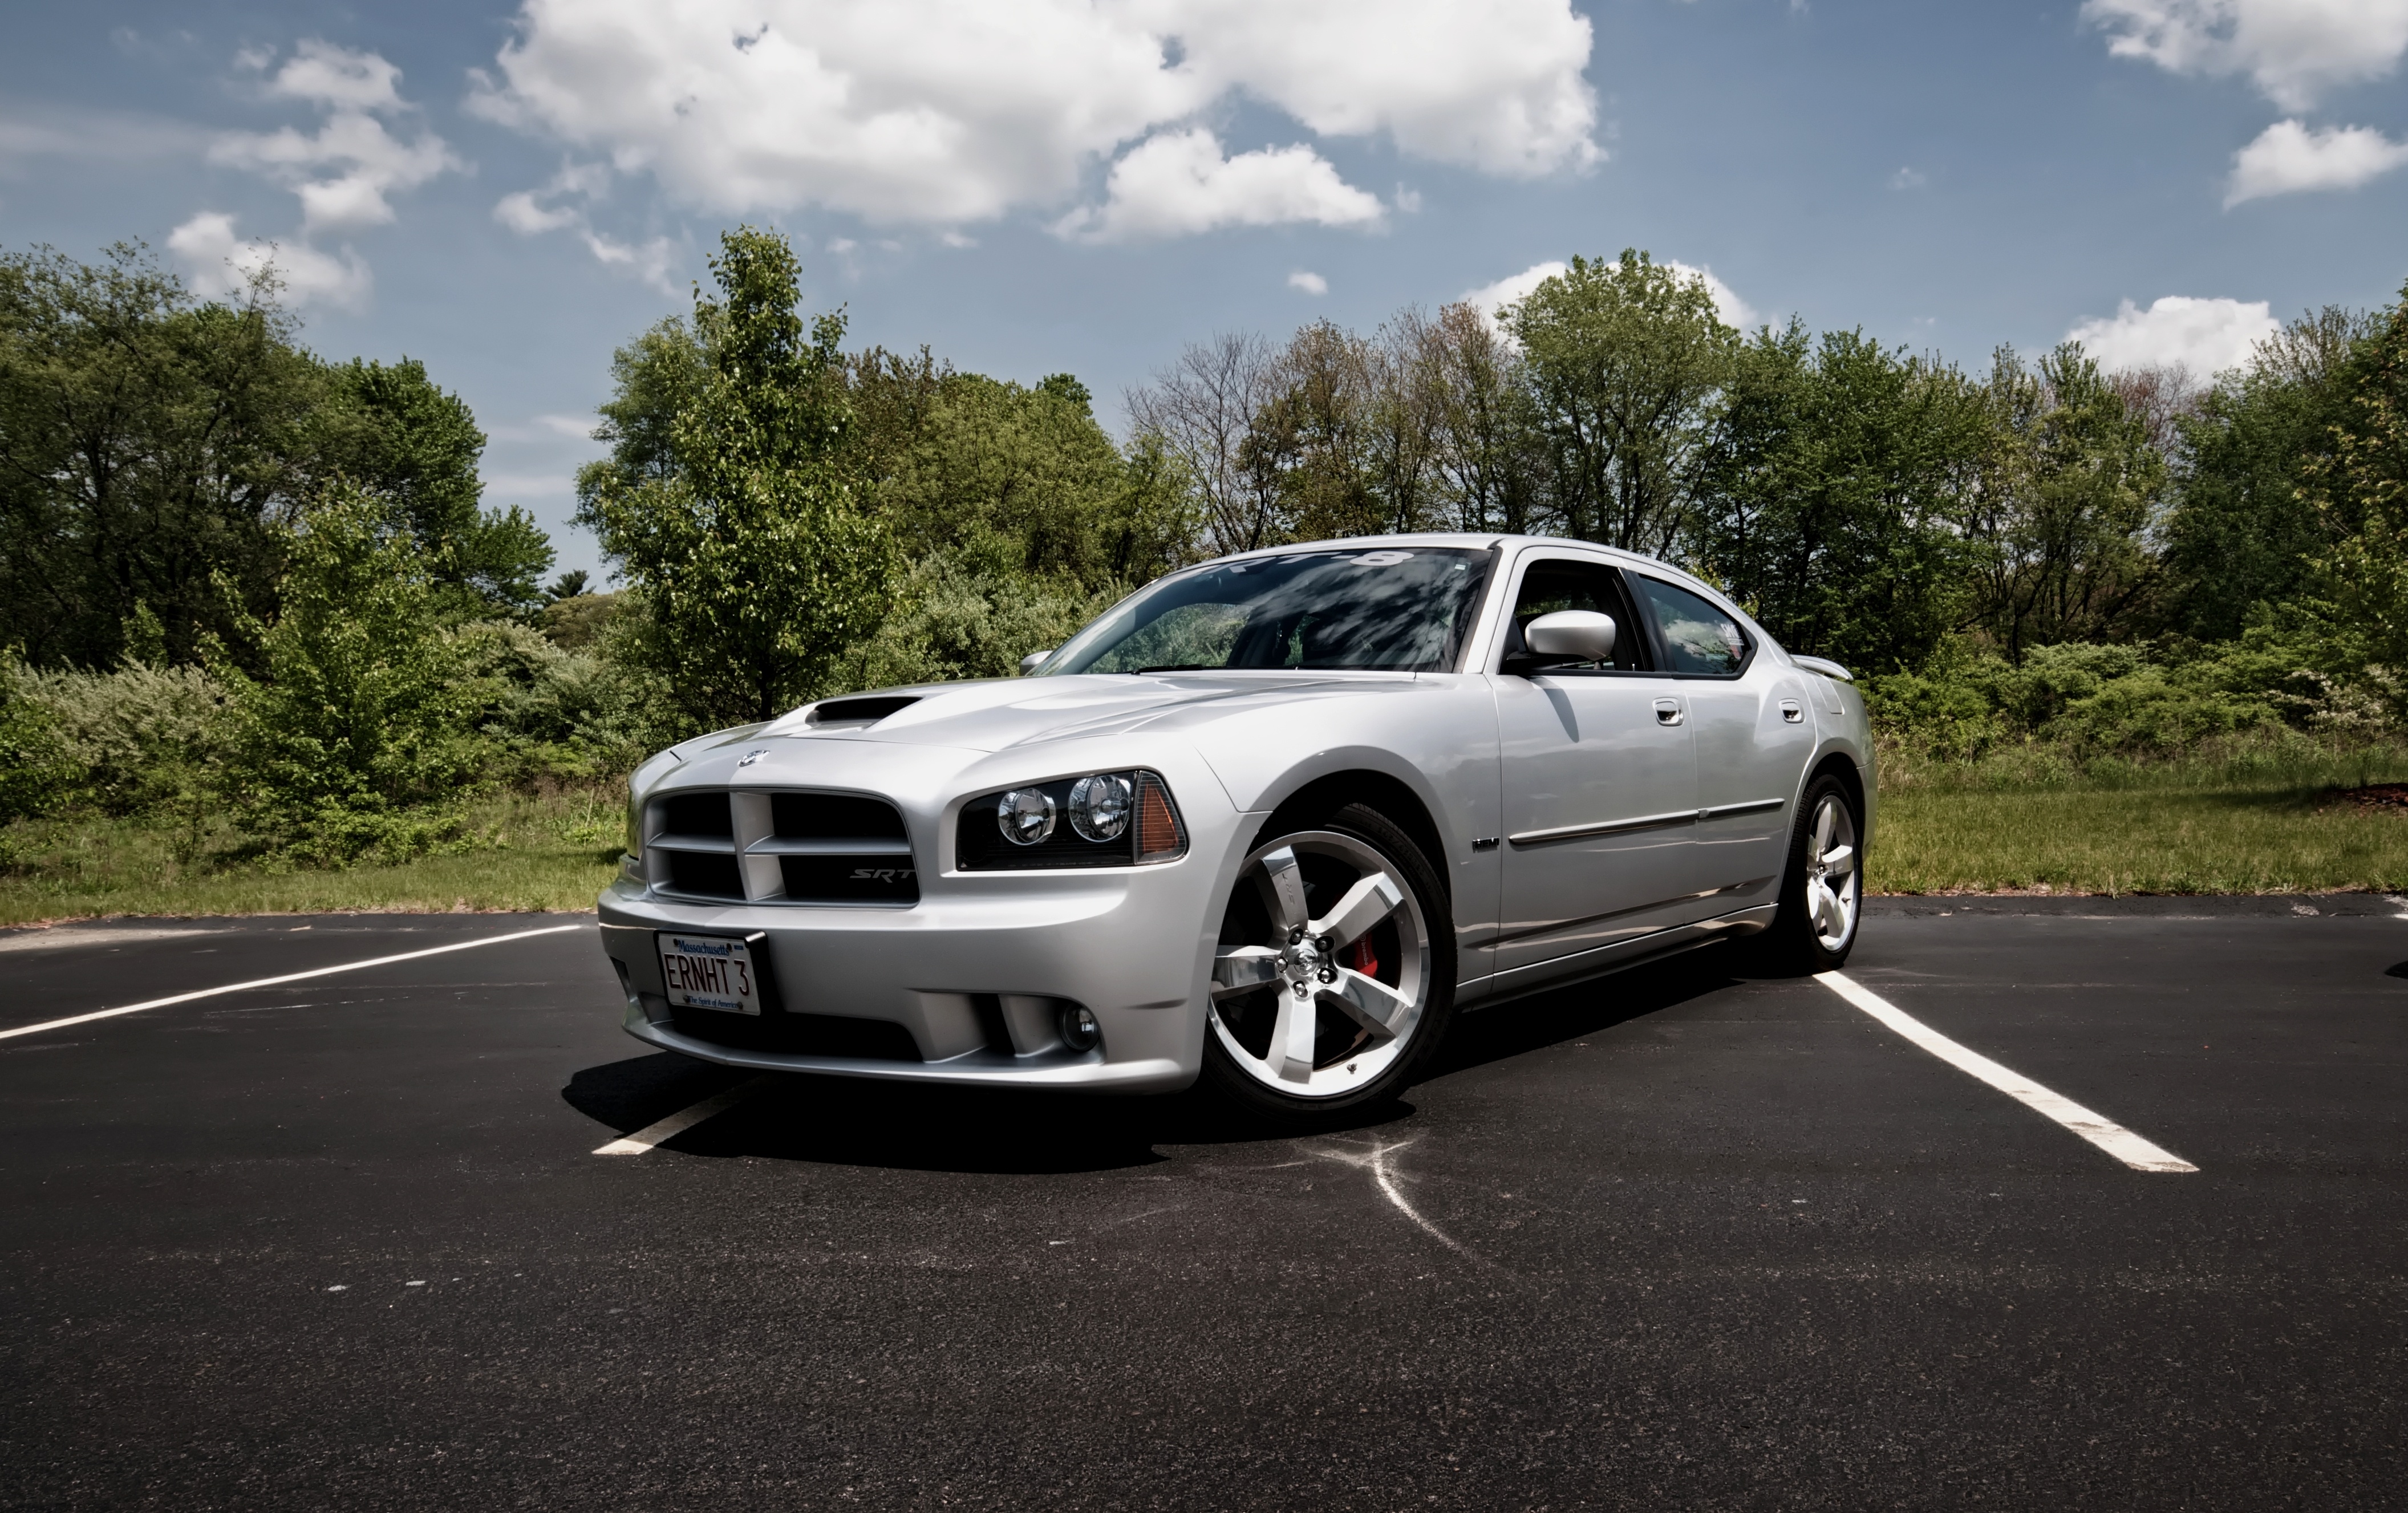 Full HD Wallpaper supercar, tuning, cars, silver, dodge charger srt8, cult car, functional hood